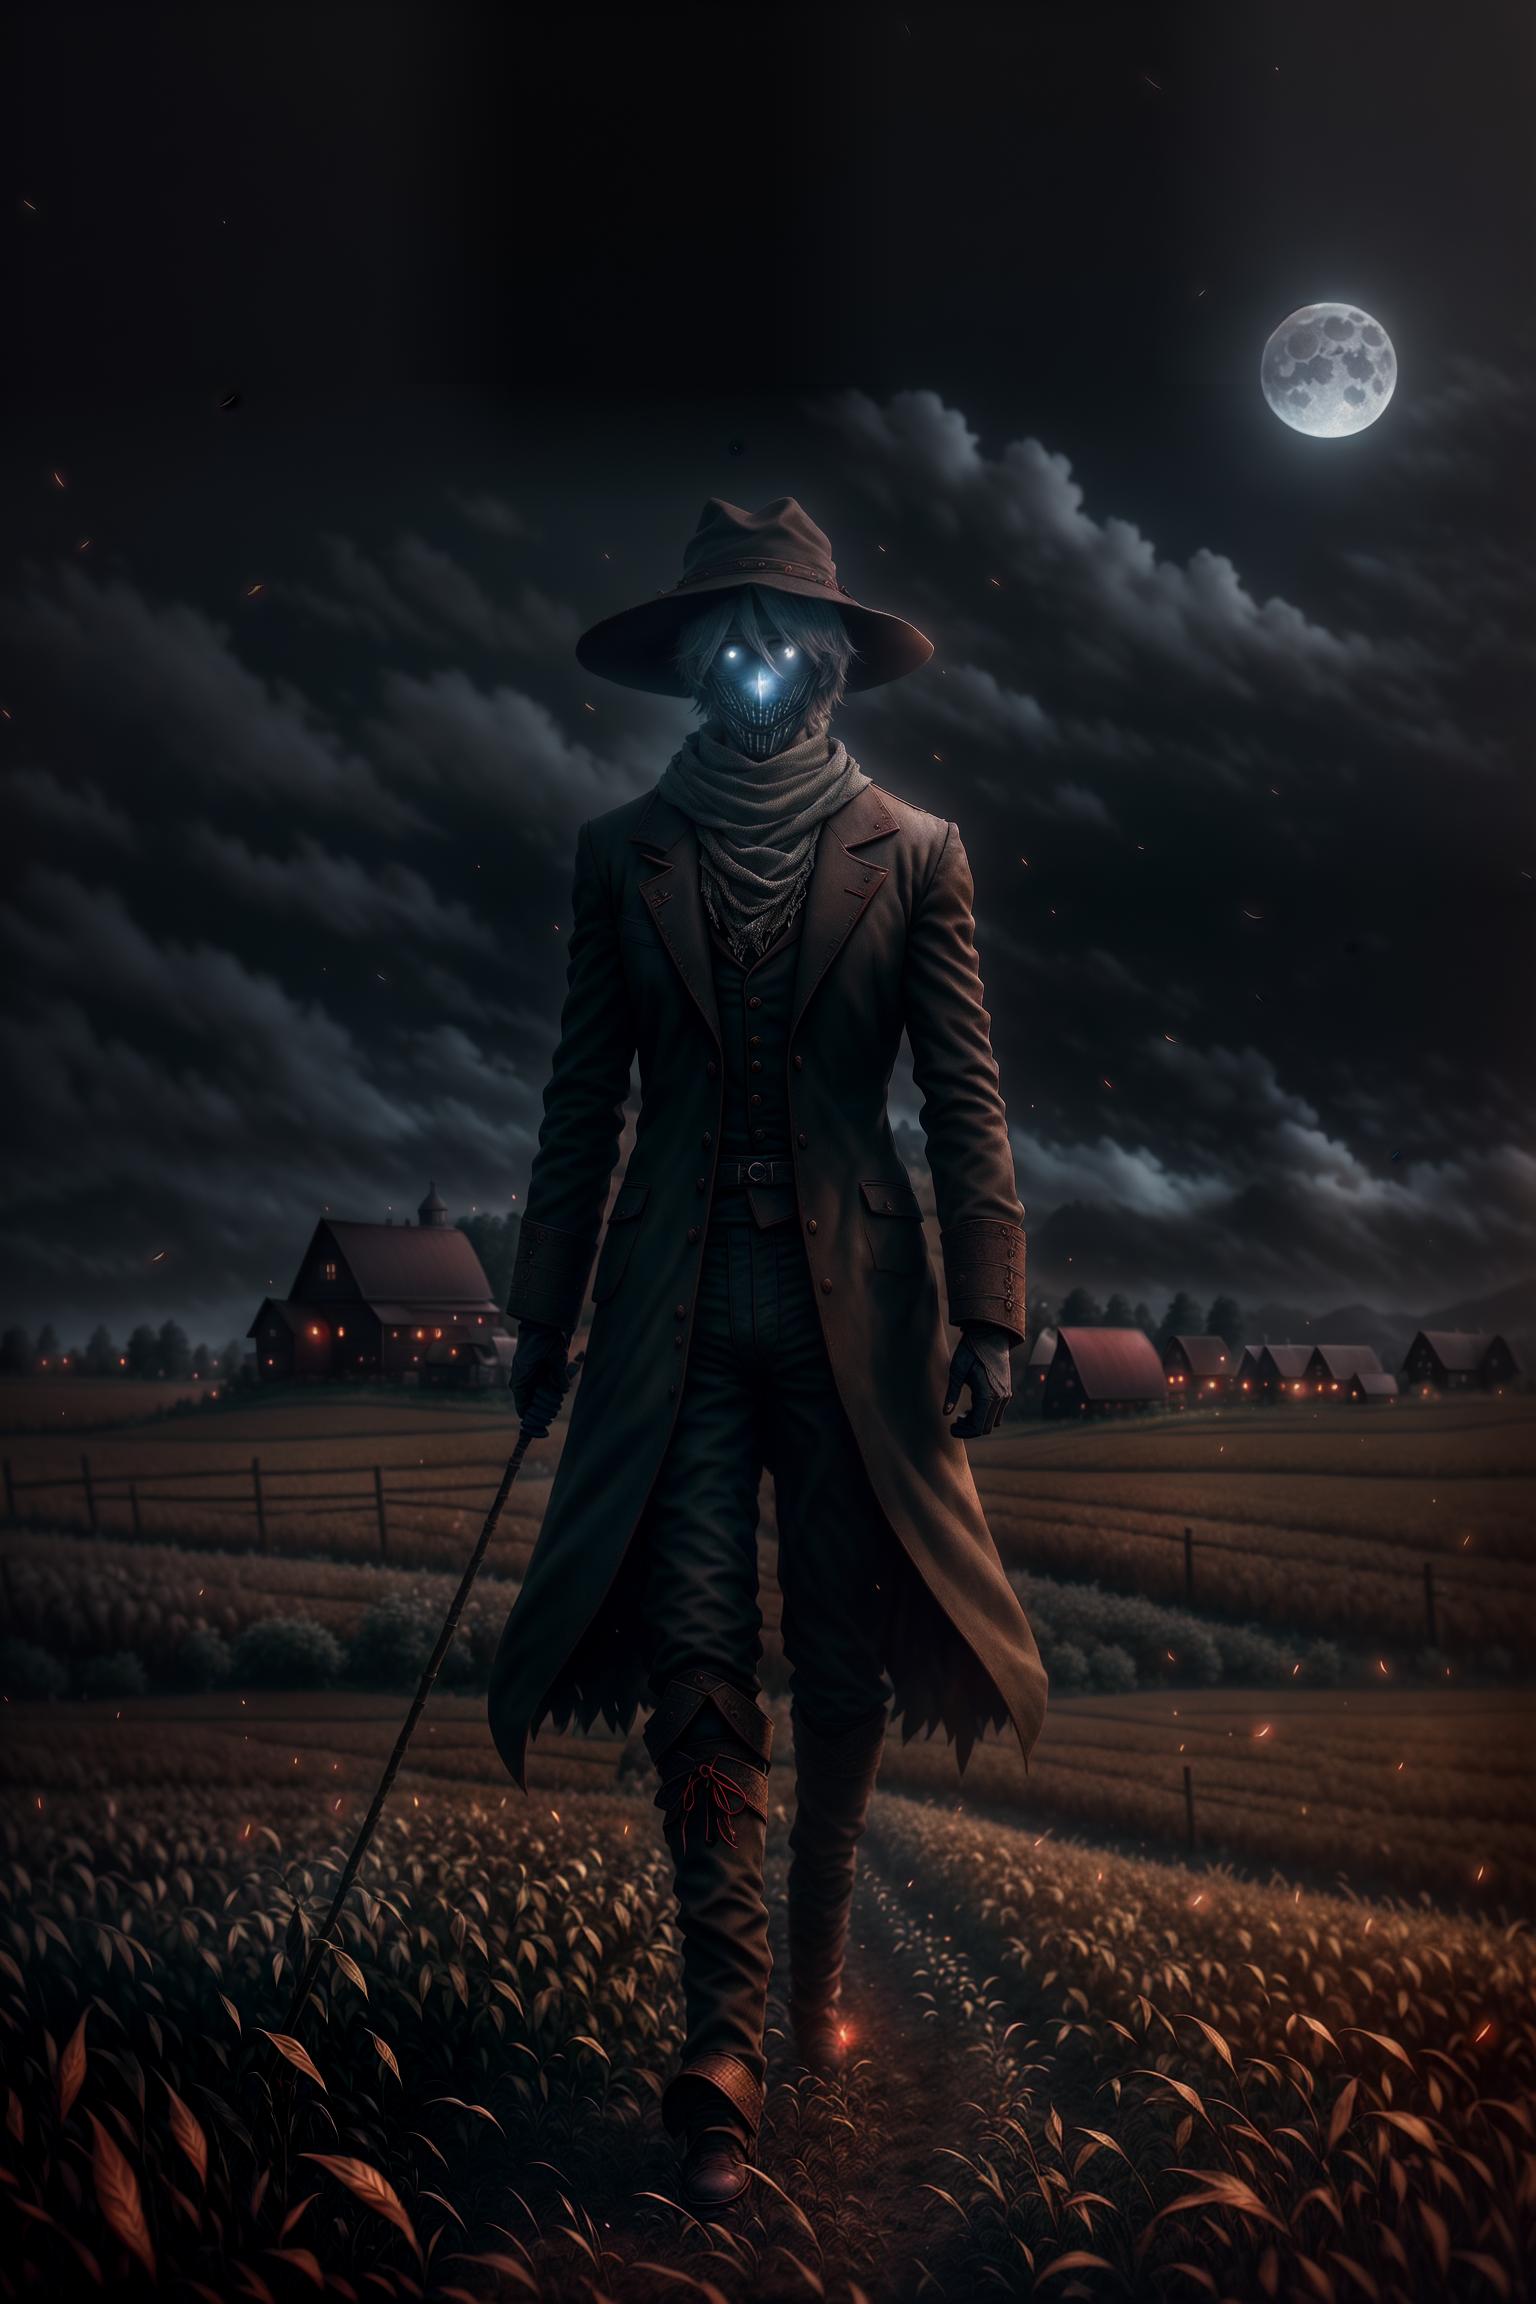  Harold, (male:1.3),(scarecrow characteristics:1.2), (body made of straw), (skinny and shriveled), (arms and legs tied to sticks), (rigid form), (hollow gaze:1.0), (no actual eyes), (glowing with an eerie light at night), (sinister smile:1.0), (stitched on a terrifying and twisted smile), (evil aura:1.0), (surrounded by dark red or black energy flow), (farmland environment:1.2), (main scene is farm fields and rice fields), (old fences), (blurry barn visible in the distance), (dim lighting:1.0), (story set under the moon), (creating a gloomy, oppressive, and helpless feeling), (bird element:0.8), (crows flying in the air), (increasing a sinister and terrifying atmosphere), (wind element:0.7), (depicting strong winds blowing through the rice f hyperrealistic, full body, detailed clothing, highly detailed, cinematic lighting, stunningly beautiful, intricate, sharp focus, f/1. 8, 85mm, (centered image composition), (professionally color graded), ((bright soft diffused light)), volumetric fog, trending on instagram, trending on tumblr, HDR 4K, 8K